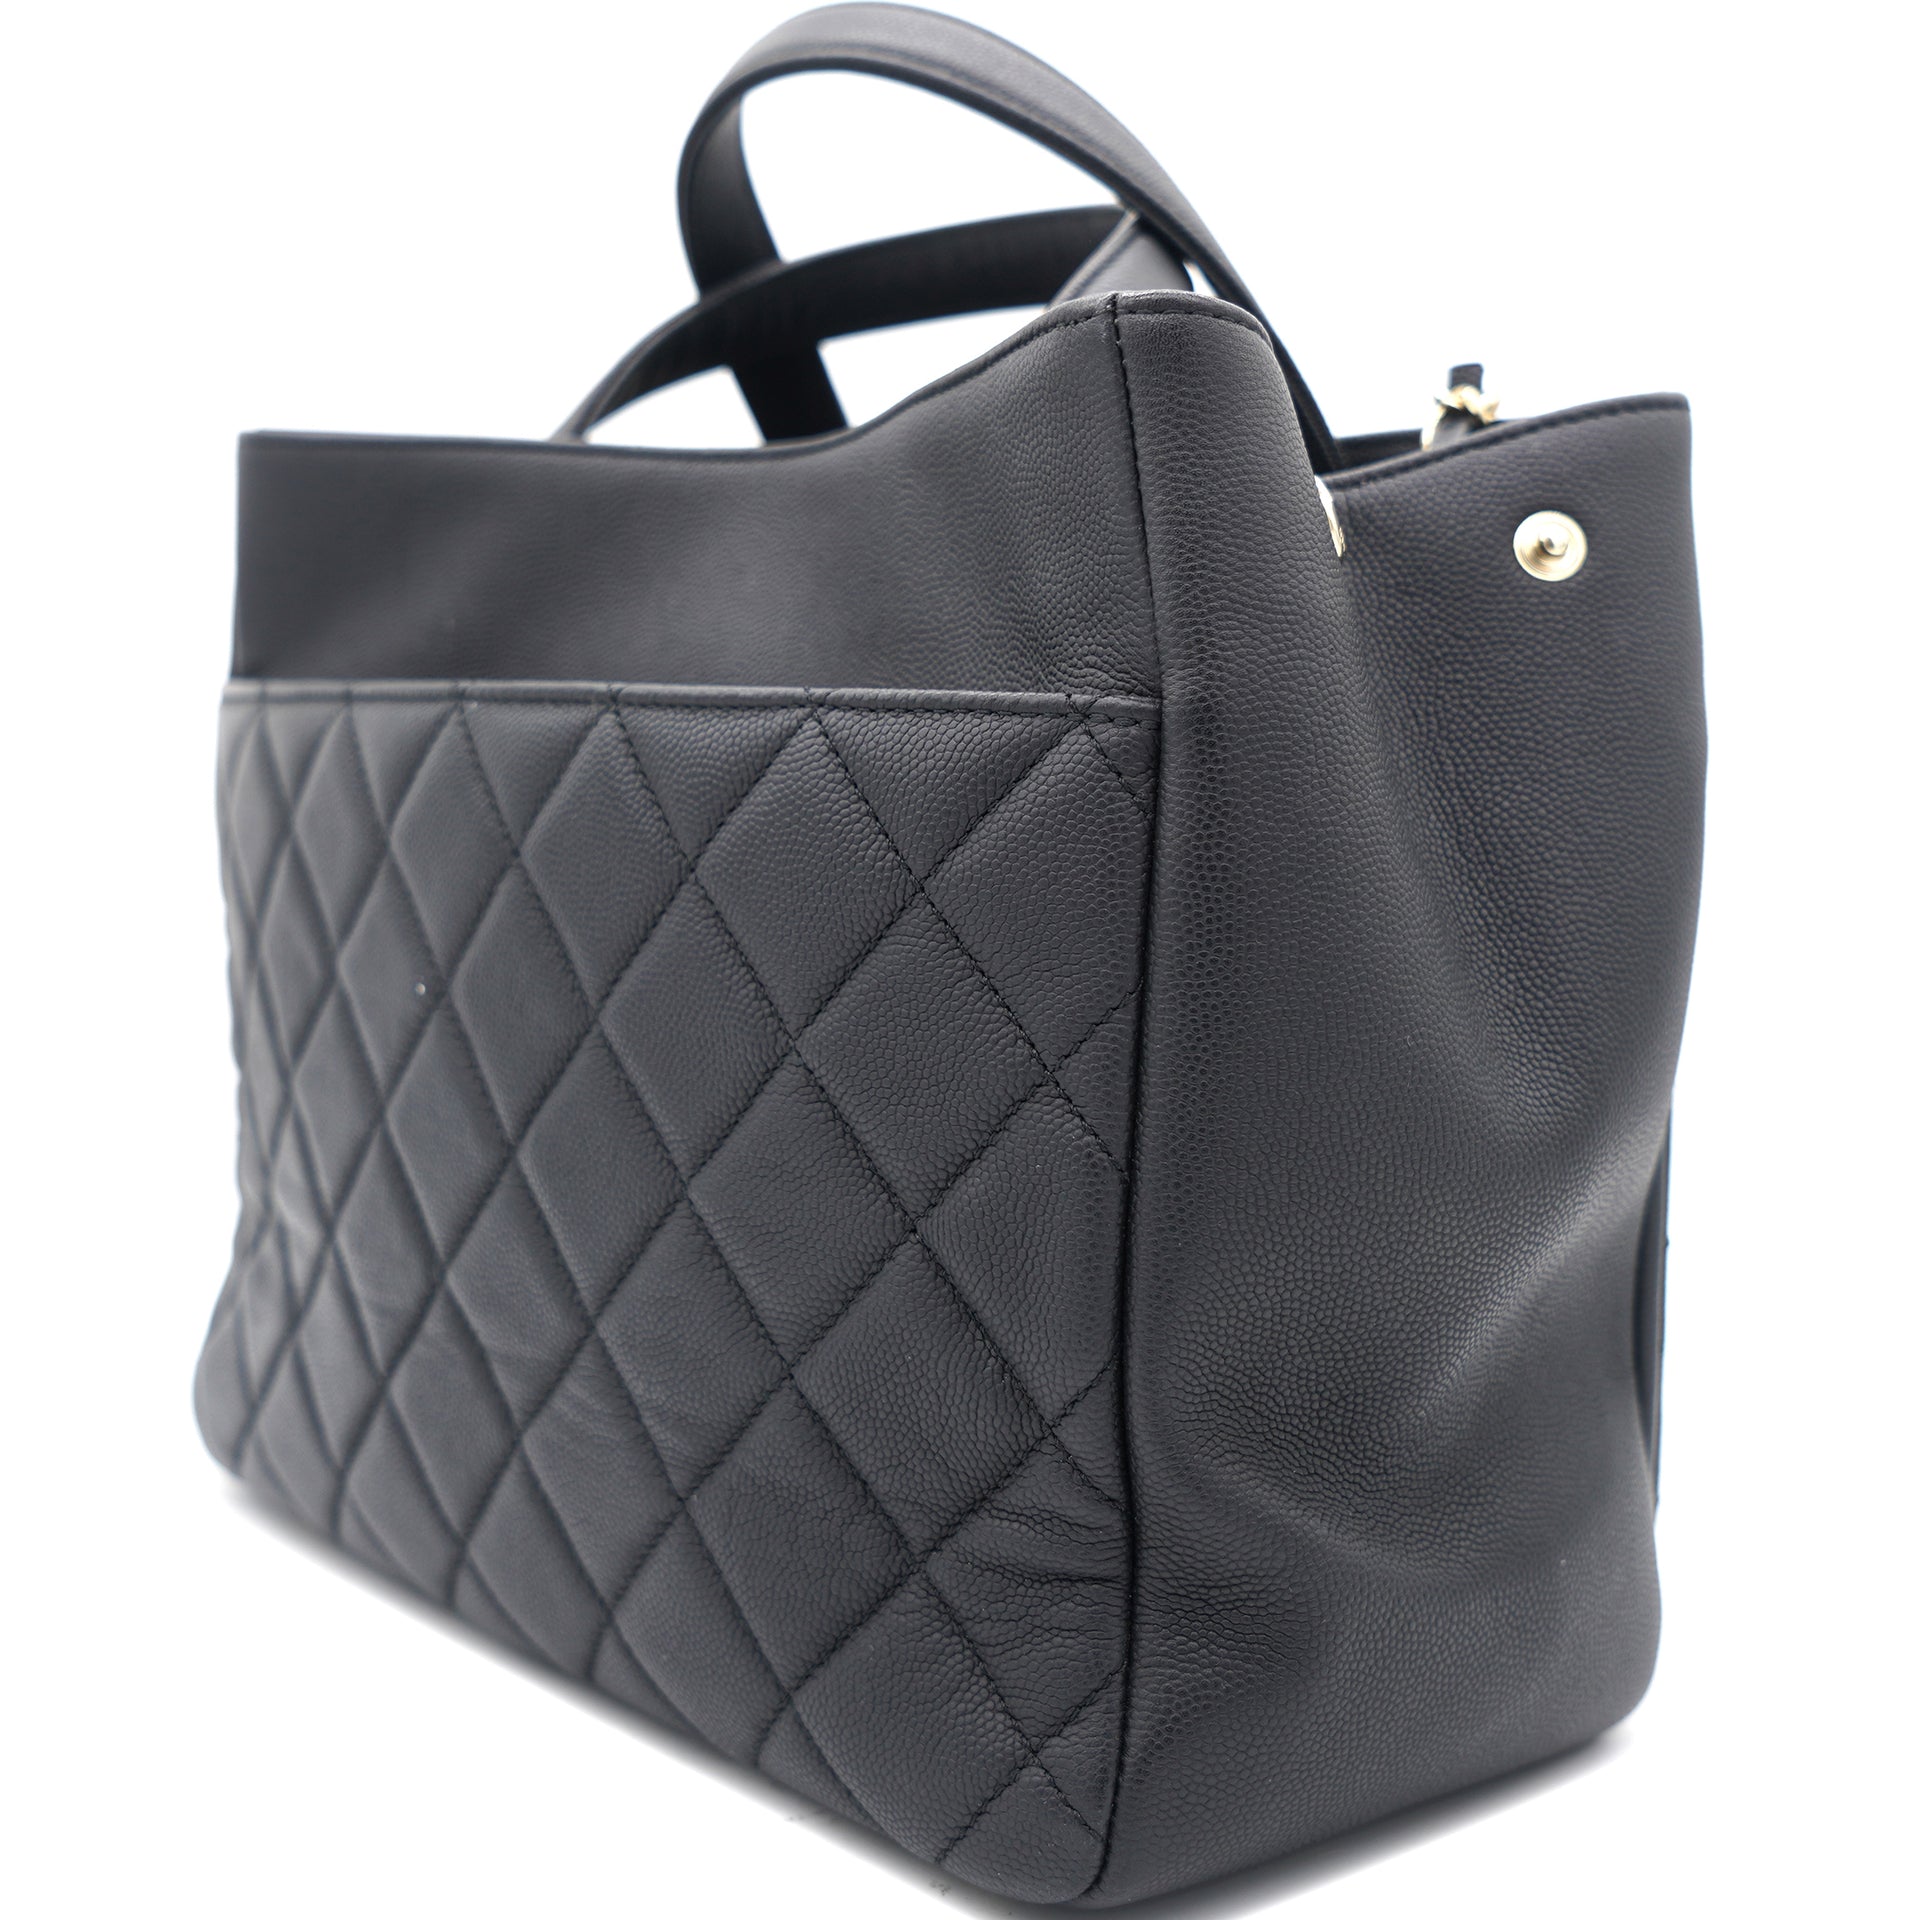 Black Quilted Caviar Leather Medium Business Affinity Tote Bag